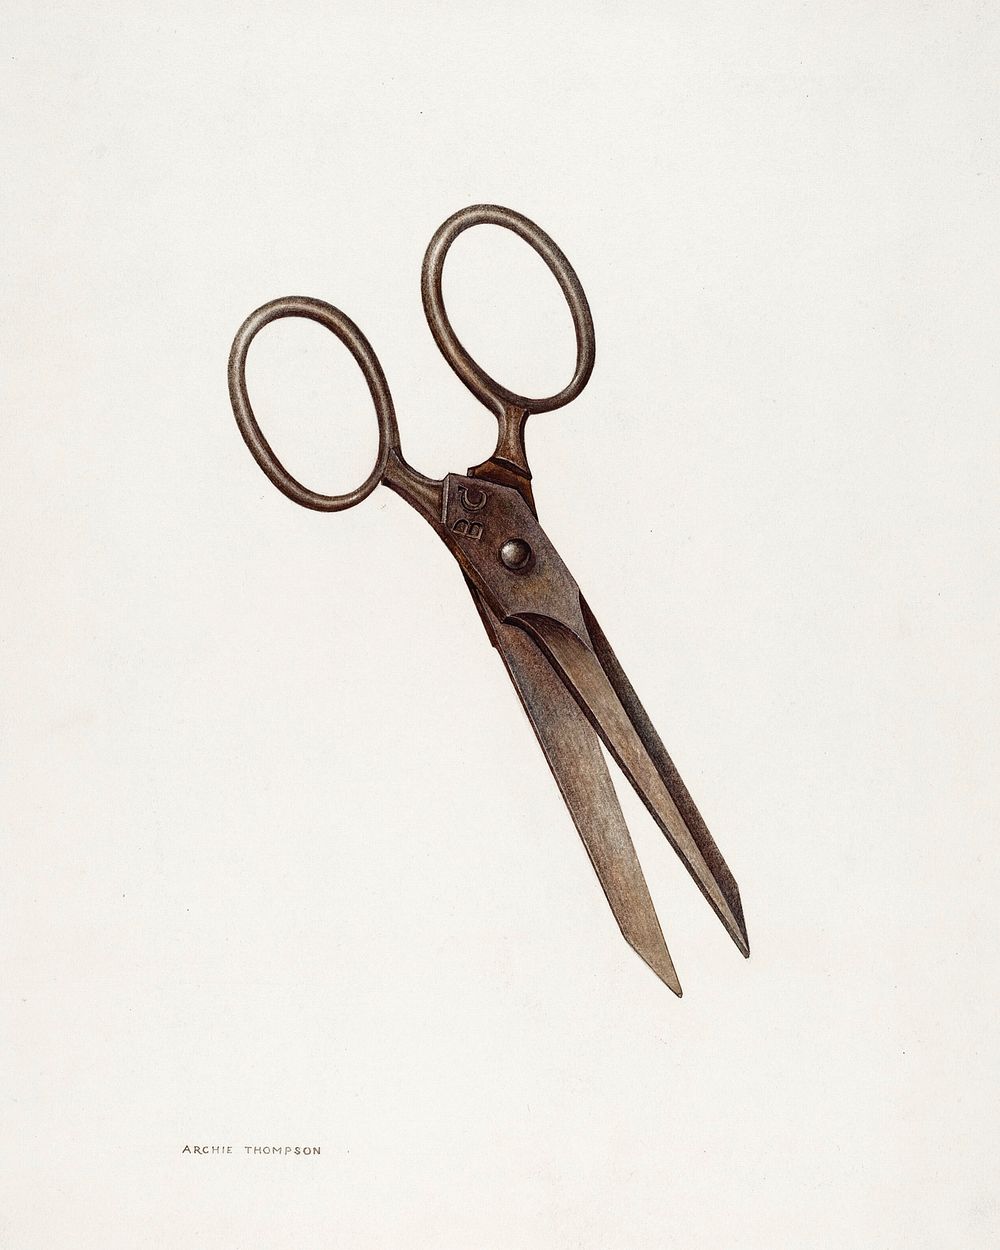 Bishop Hill: Small Scissors (ca. 1939) by Archie Thompson. Original from The National Gallery of Art. Digitally enhanced by…